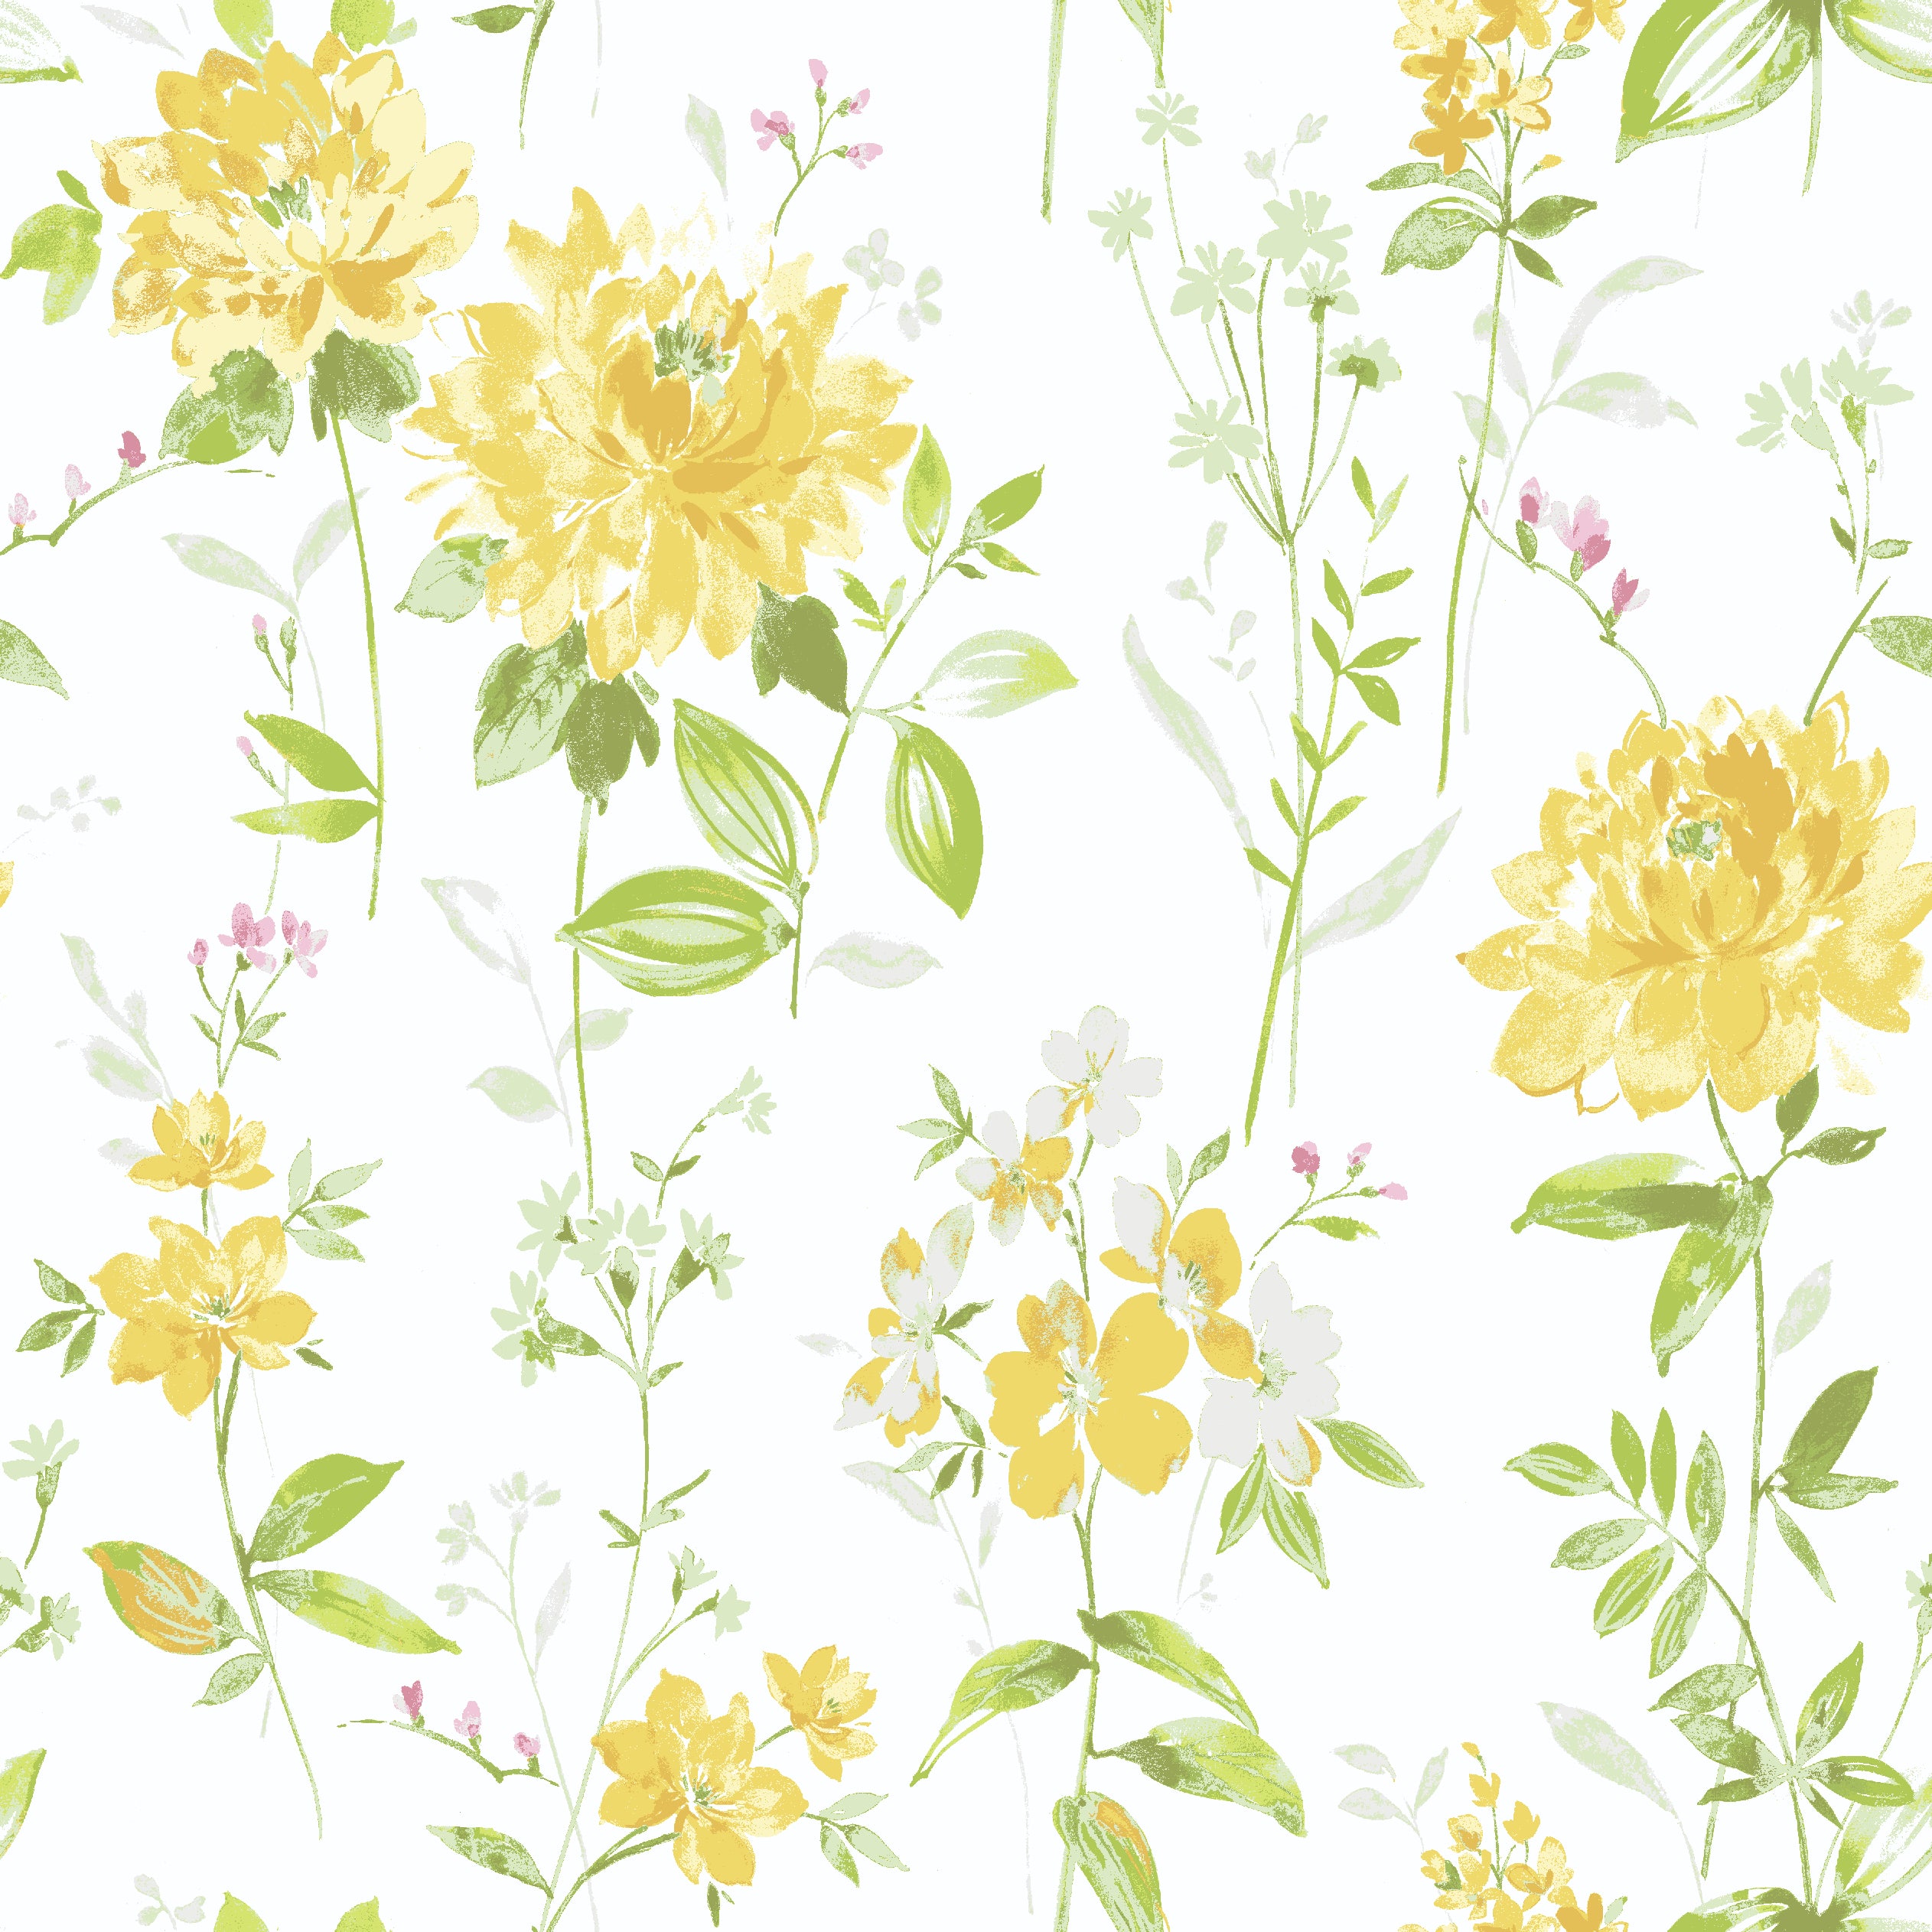 Waverly Inspirations Cotton 44" Floral Yellow Grass Color Sewing Fabric by the Yard